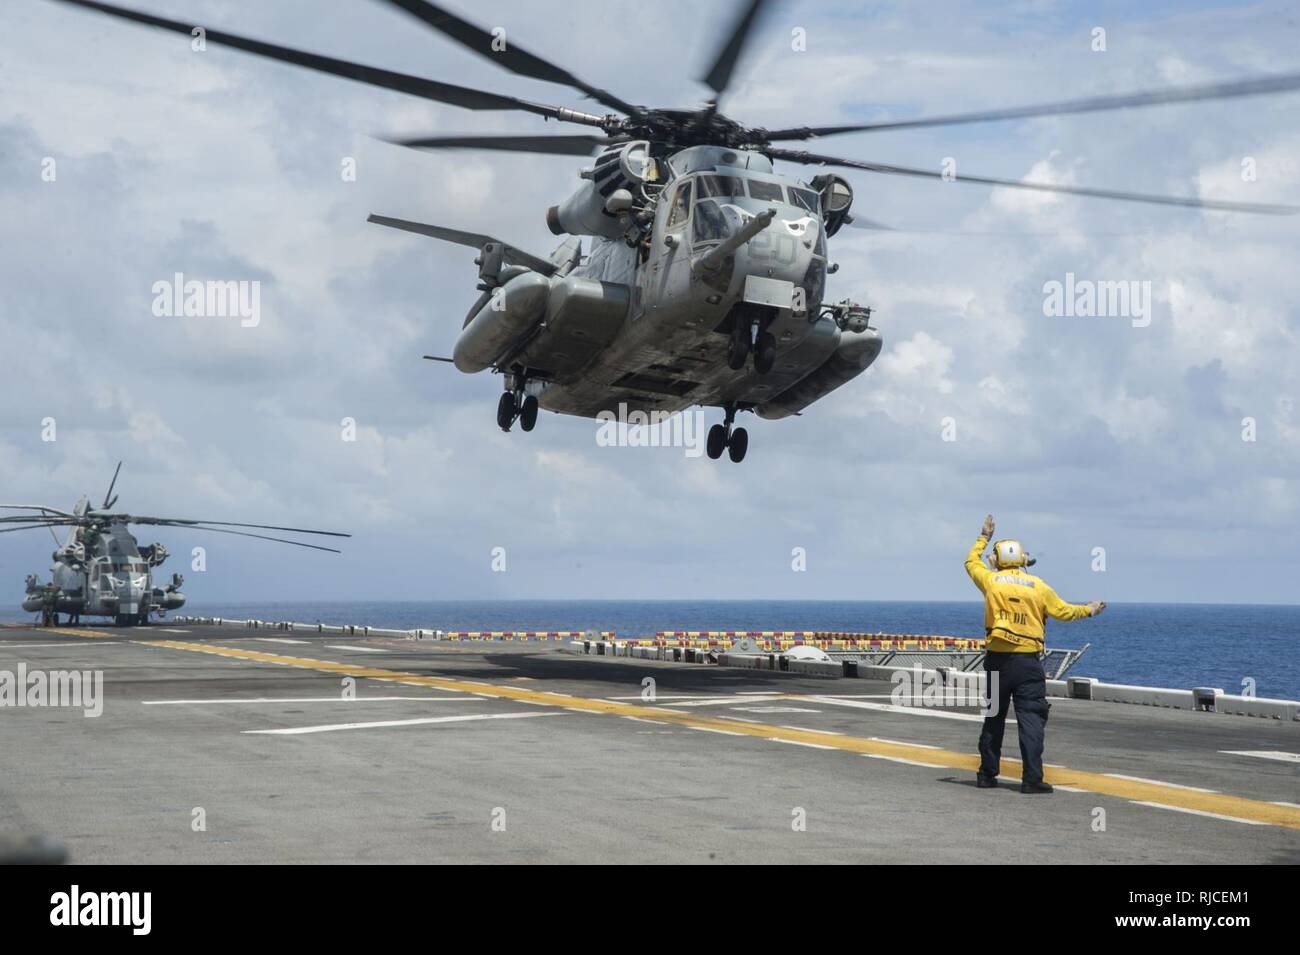 SOUTH CHINA SEA (Nov. 16, 2016) Seaman Caleb Lambert, from Modesto, Calif., directs a CH-53E Super Stallion as it launches from the amphibious assault ship USS Makin Island (LHD 8). Makin Island, the flagship of the Makin Island Amphibious Ready Group, is operating in the U.S. 7th Fleet area of operations with the embarked 11th Marine Expeditionary Unit in support of security and stability in the Indo-Asia-Pacific region. Stock Photo